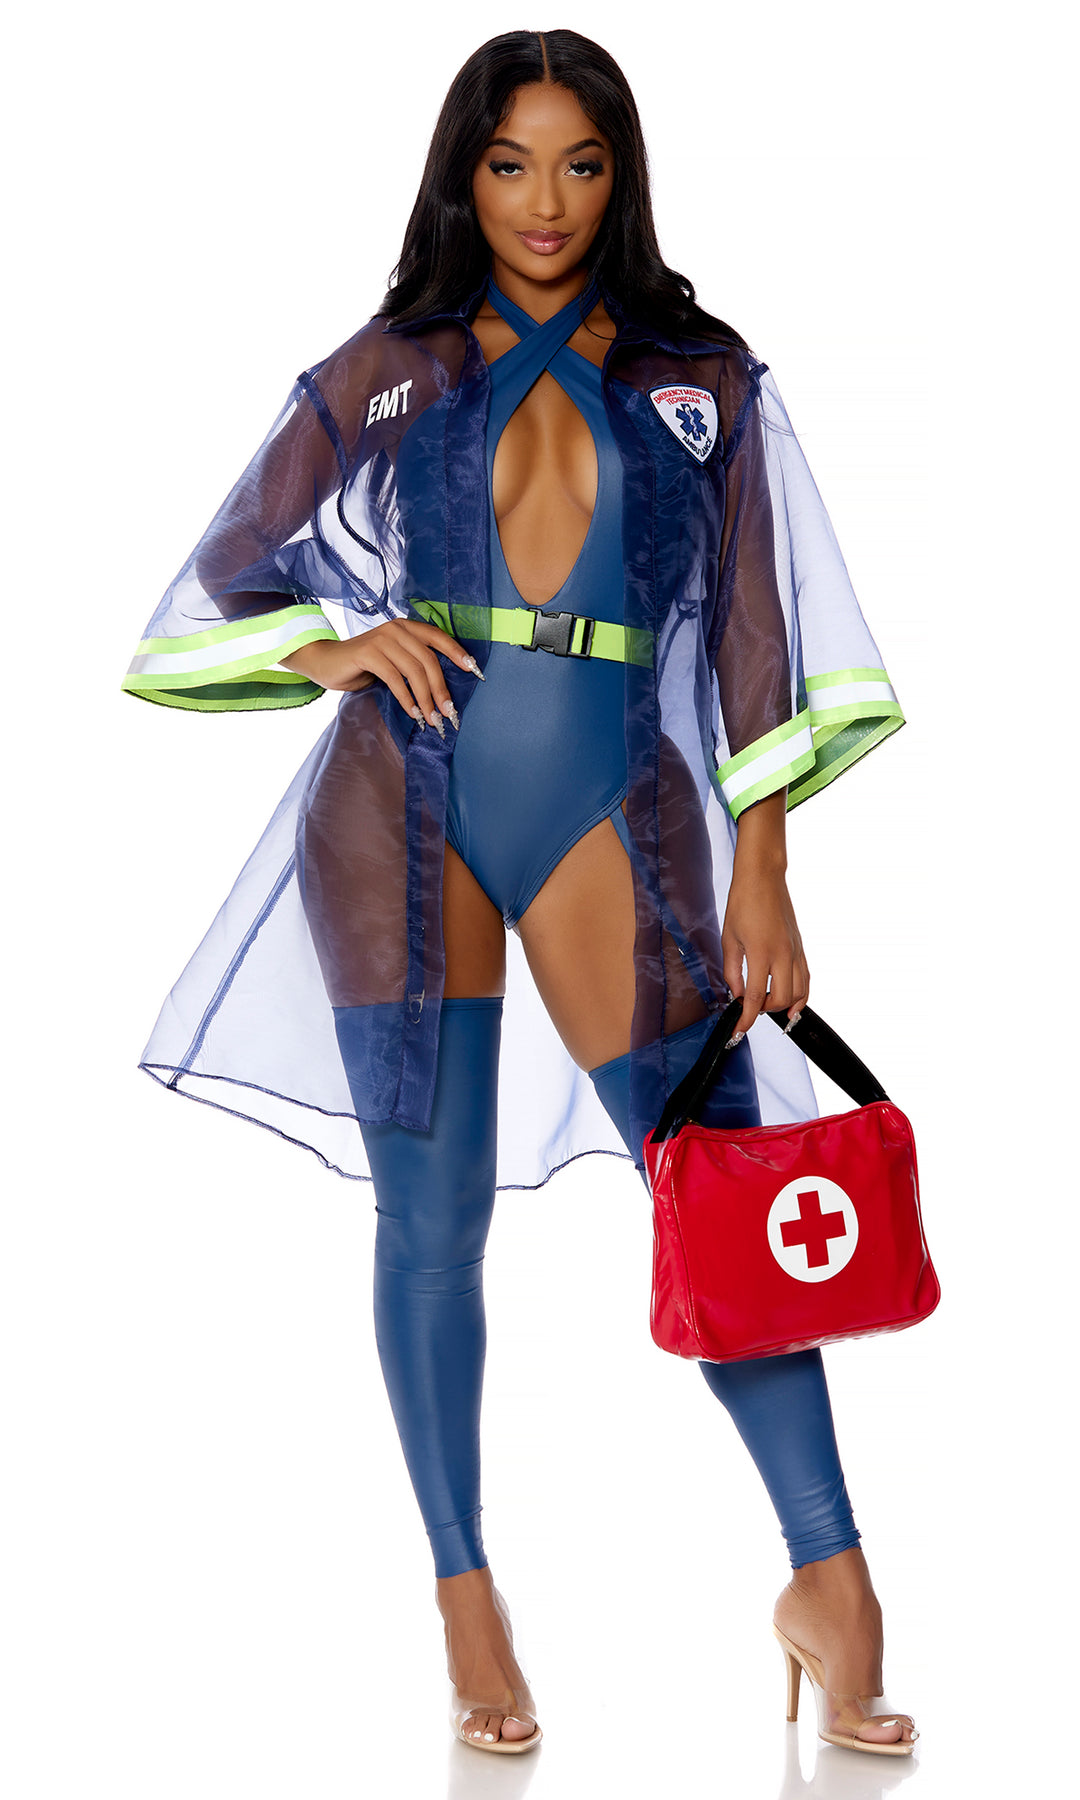 What's the 911 Sexy EMT Costume